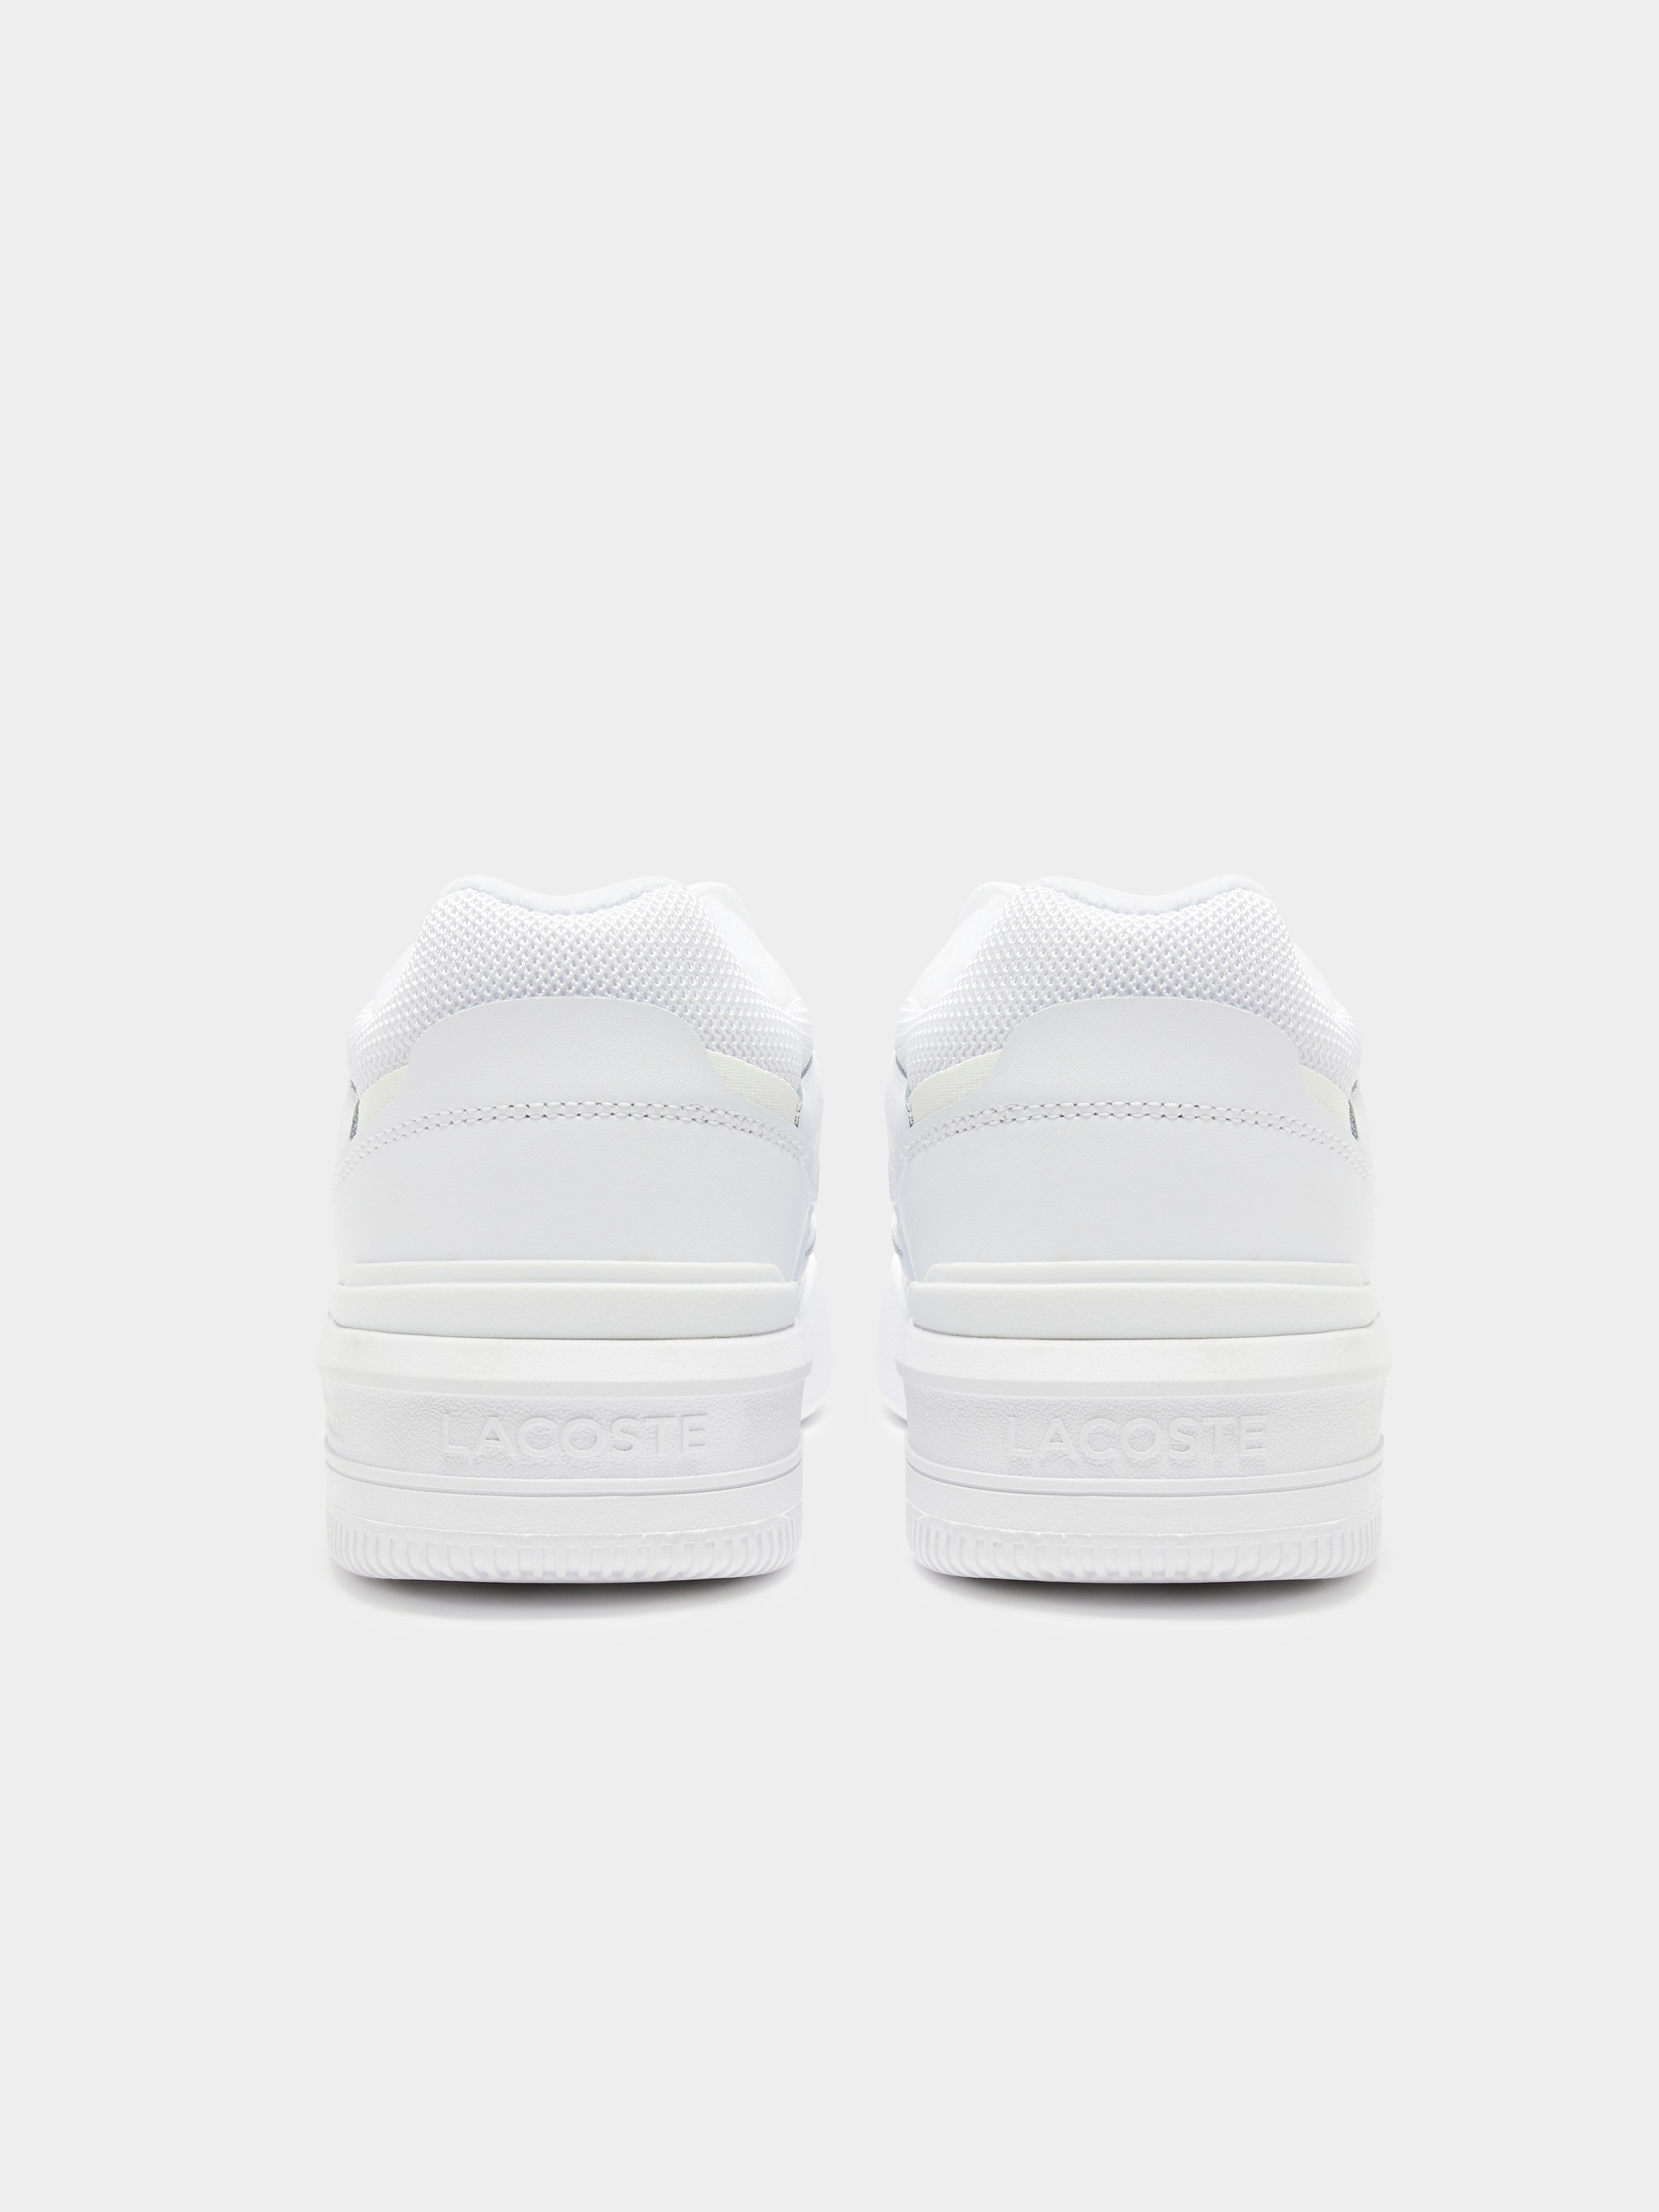 Mens Lineshot Sneakers in White